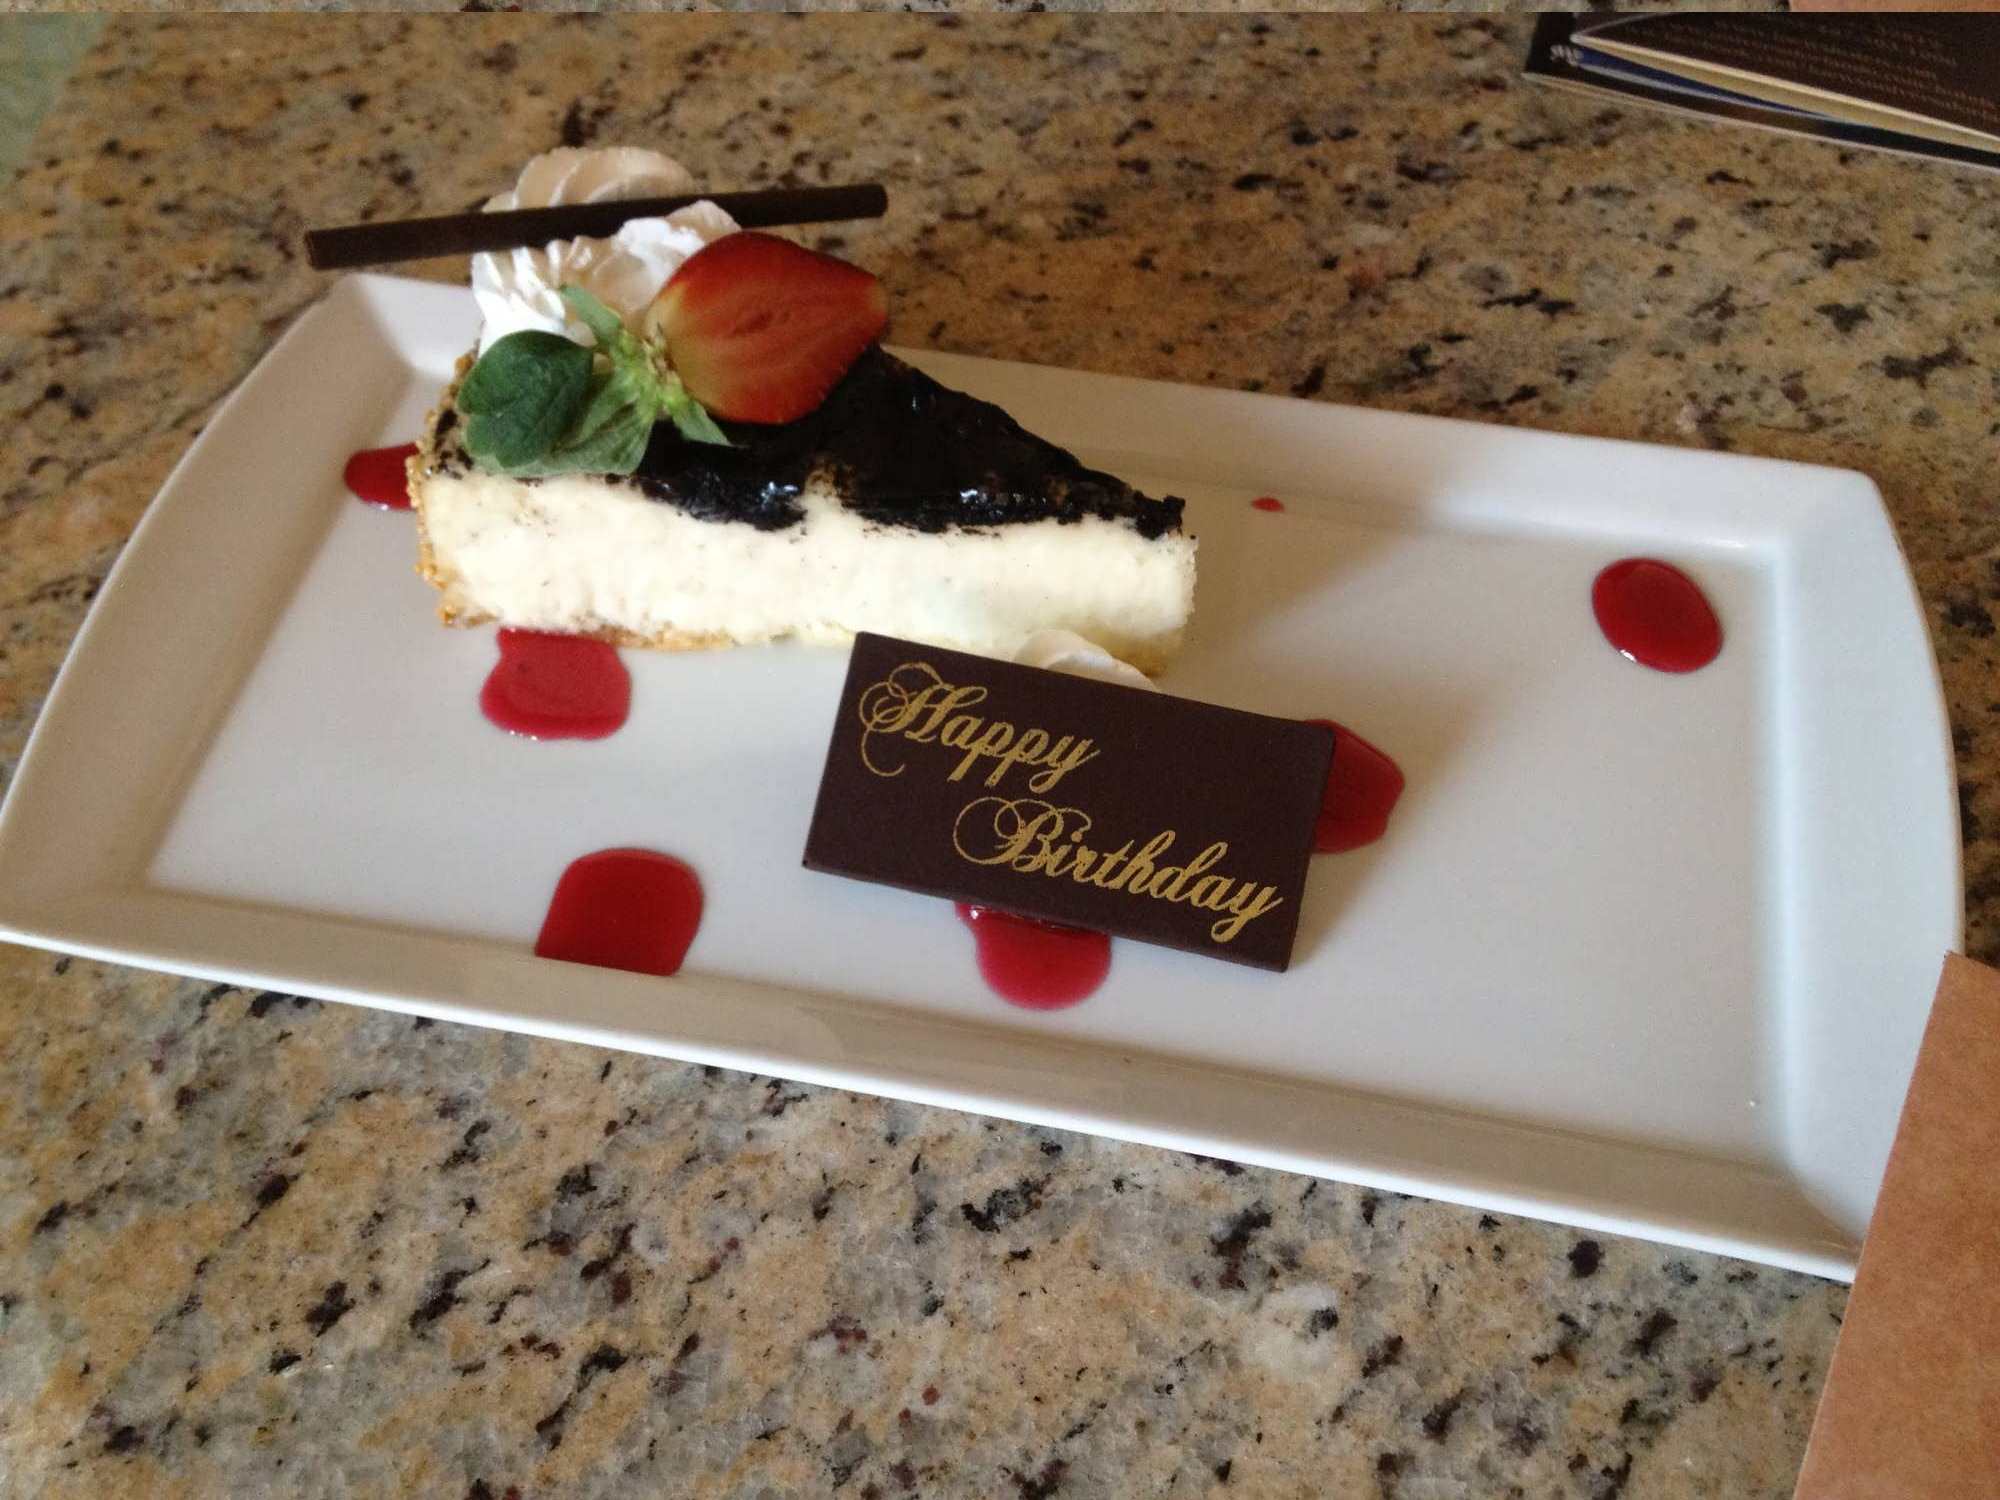 Celebrating your birthday or special occasion at Universal Orlando